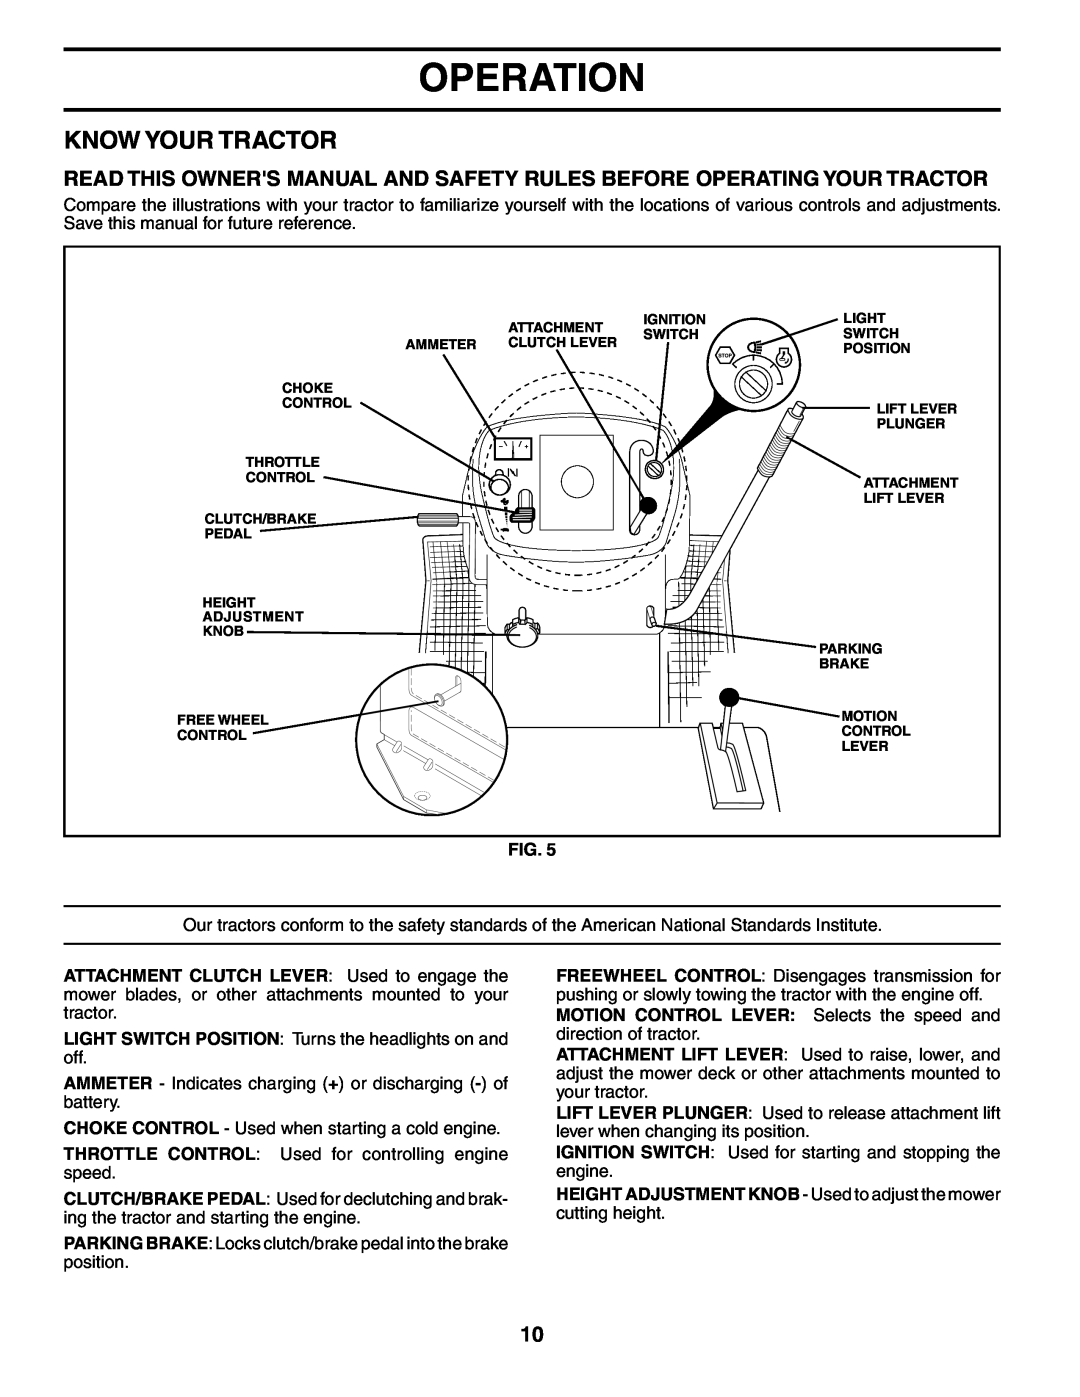 Poulan 184617 owner manual Know Your Tractor, Operation, HEIGHT ADJUSTMENT KNOB - Used to adjust the mower cutting height 